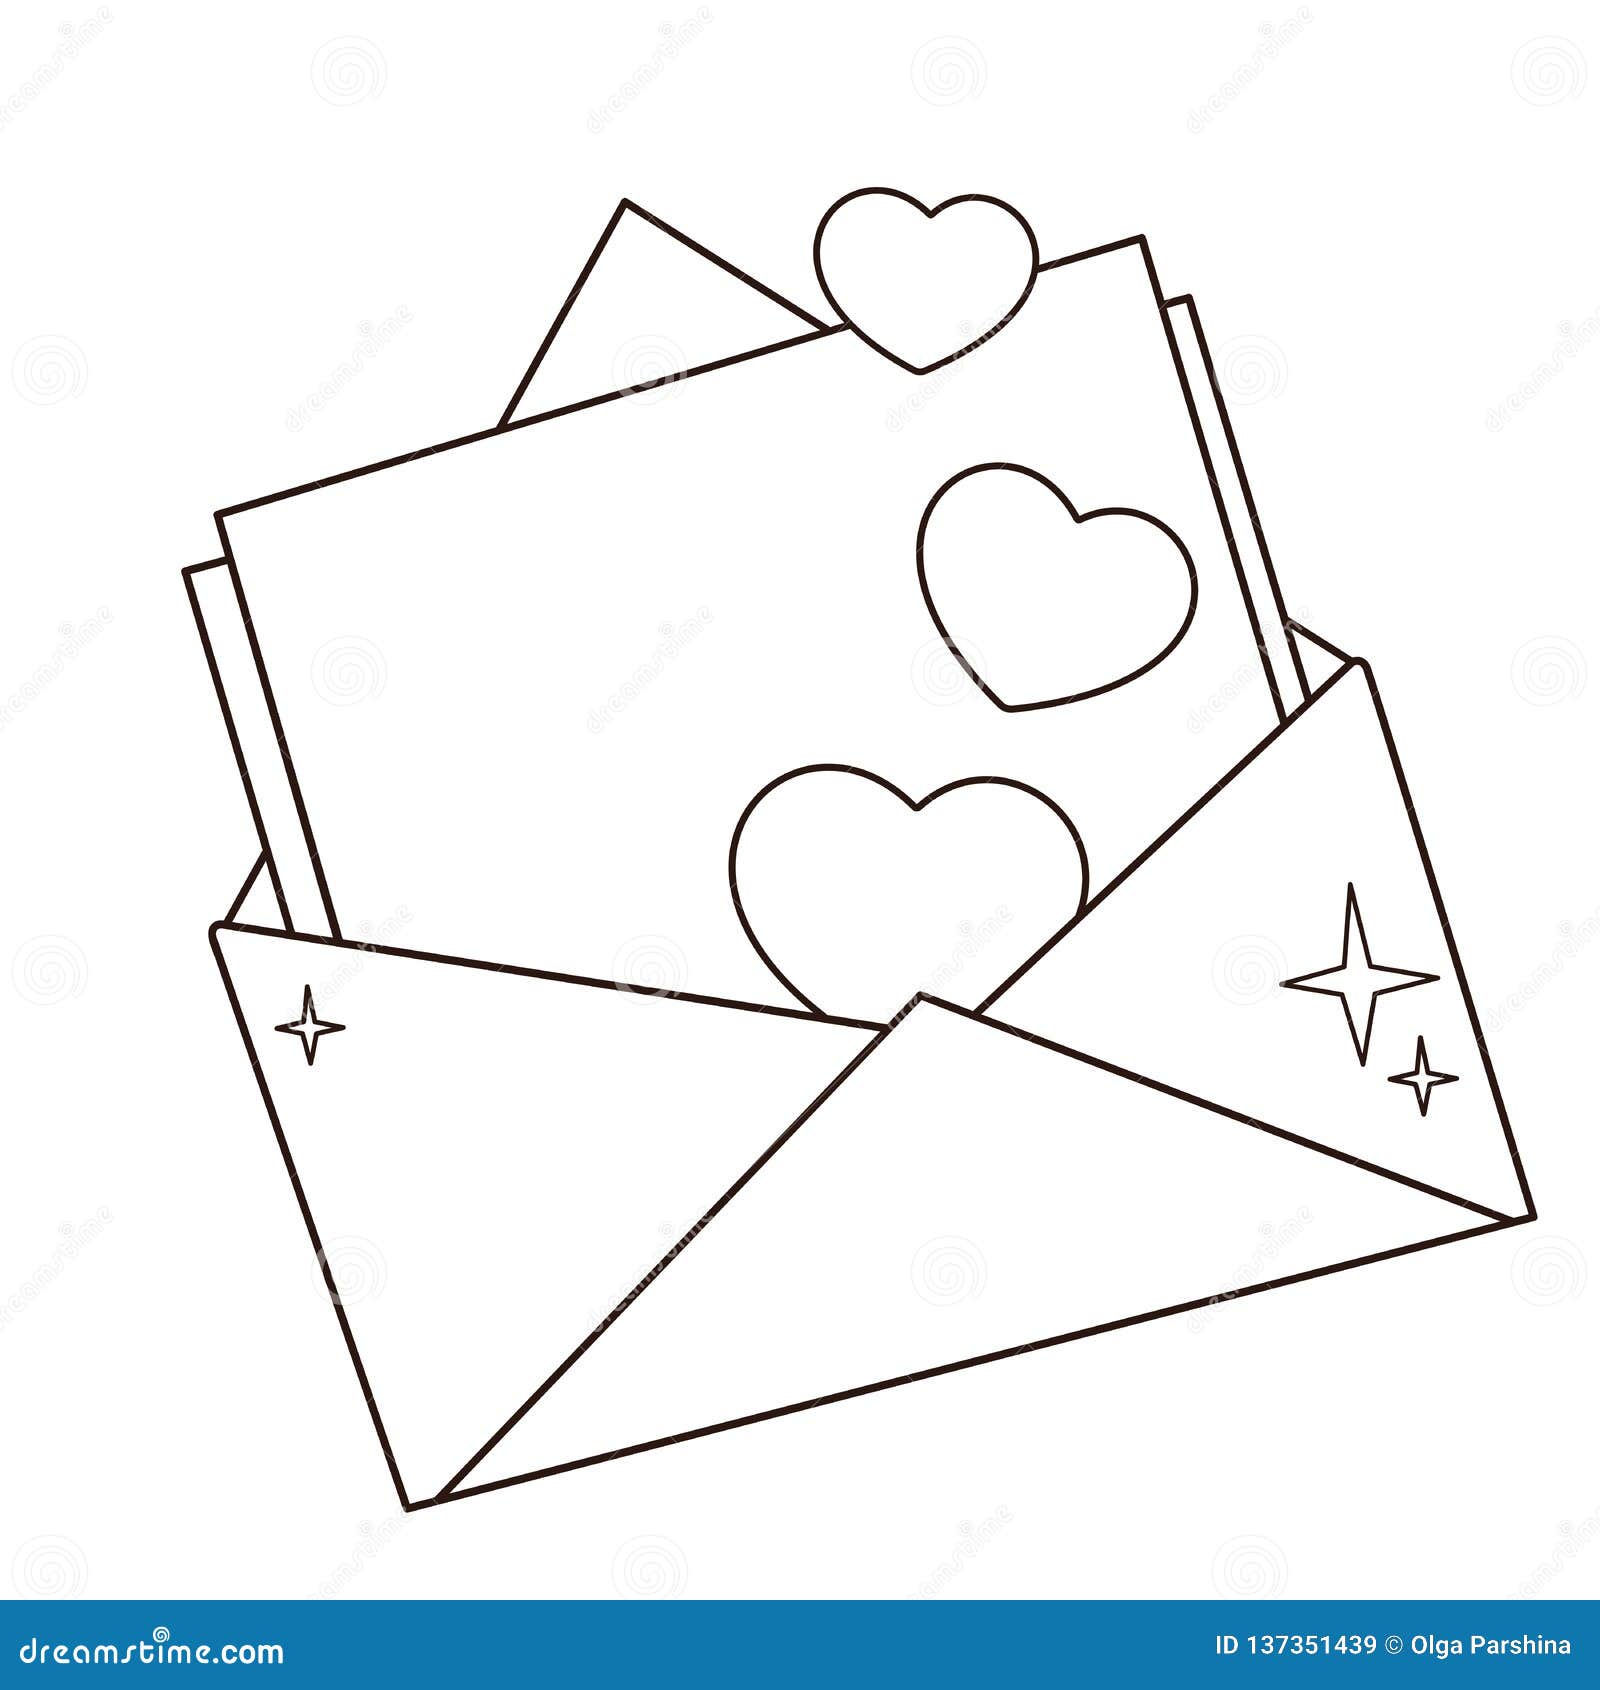 Coloring page outline of greeting letter with hearts valentines day birthday stock vector